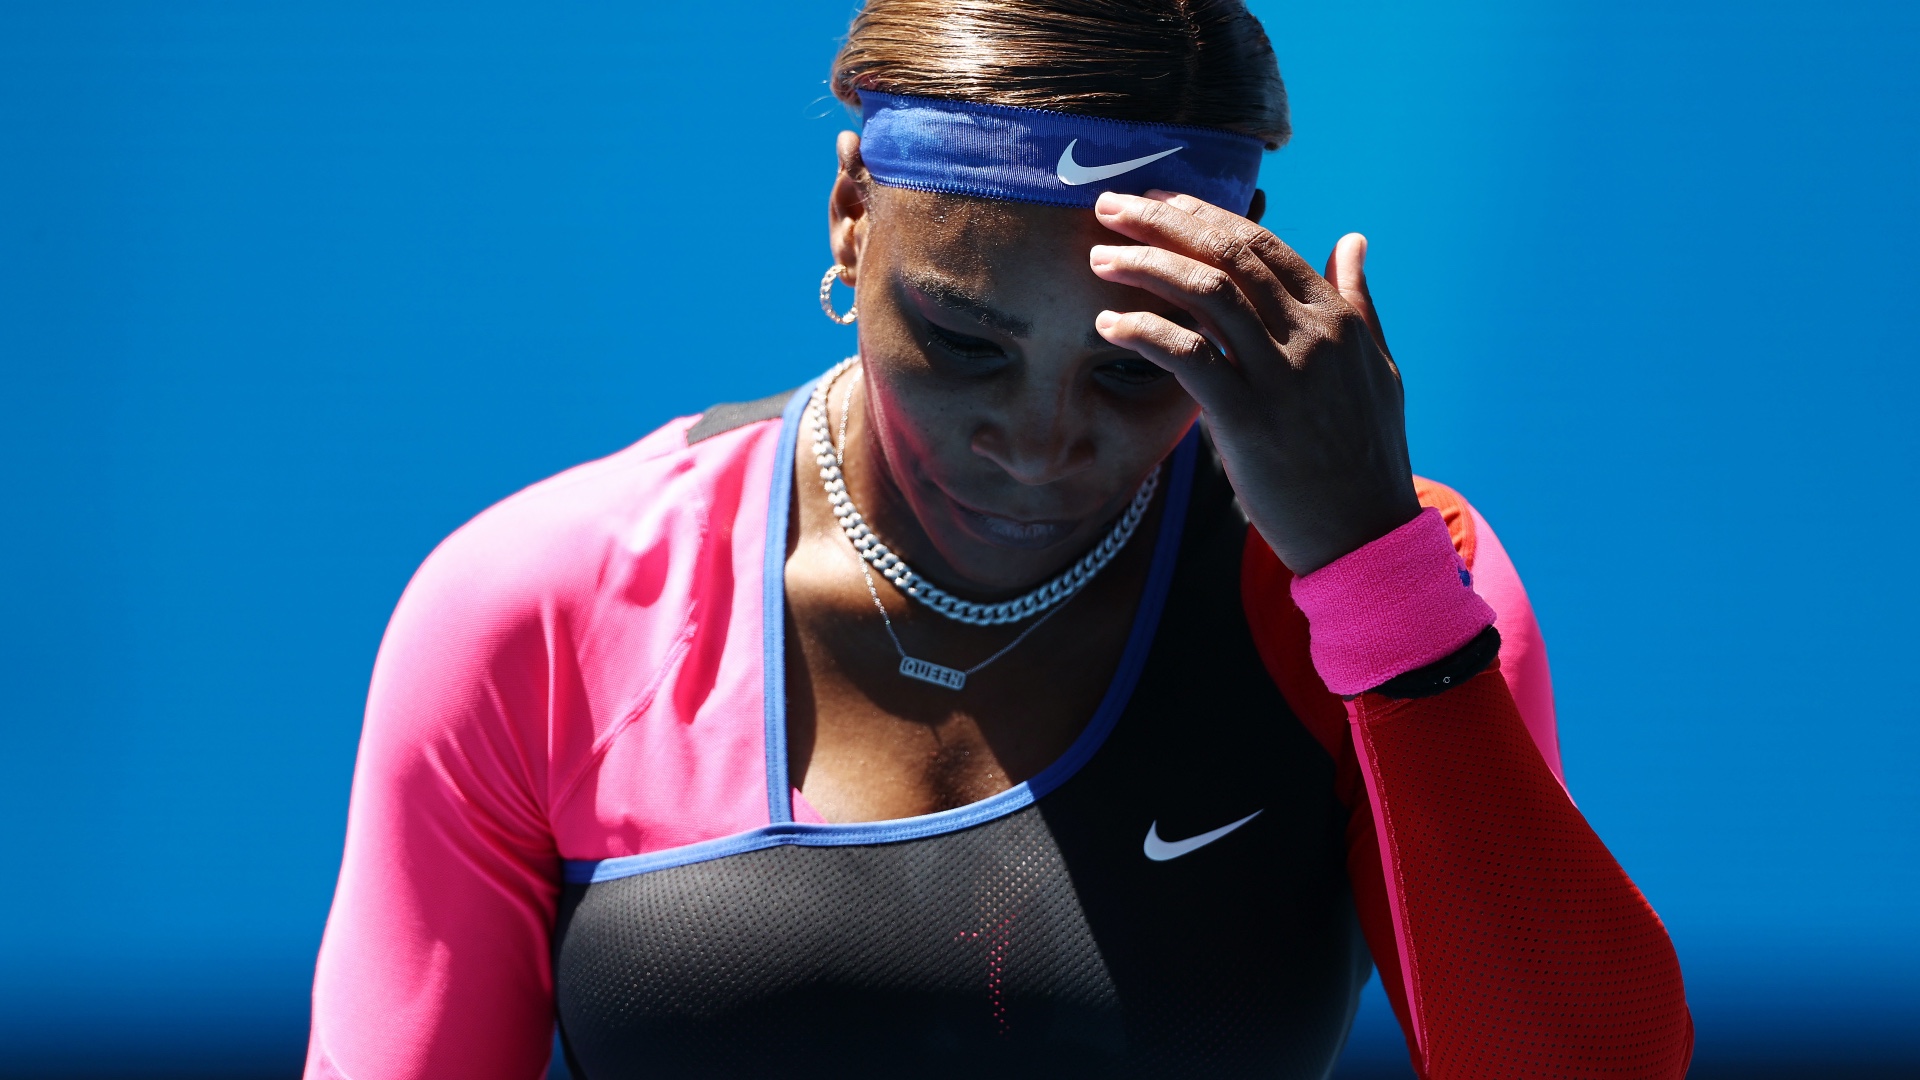 Australian Open: 'It's going to be a rough few days' - Serena reacts to Victoria lockdown